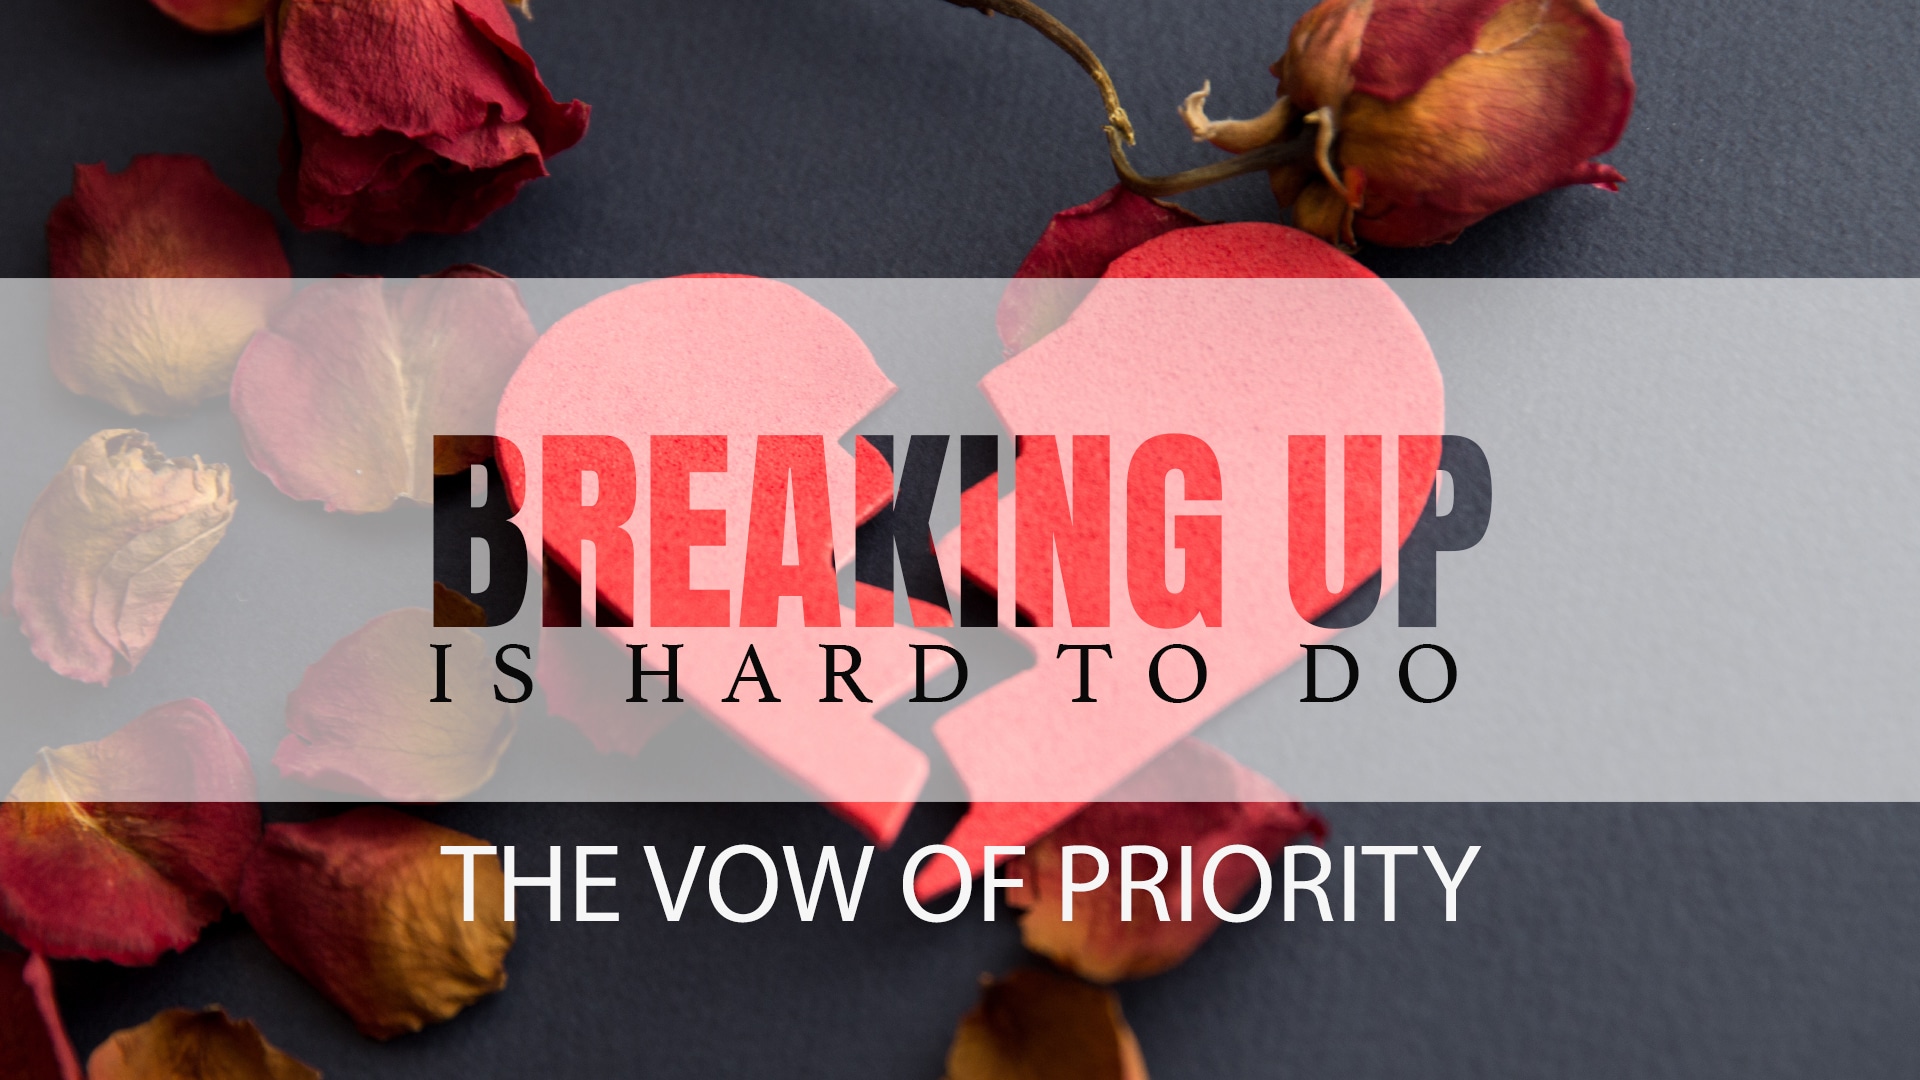 The Vow of Priority - Breaking Up is Hard to Do